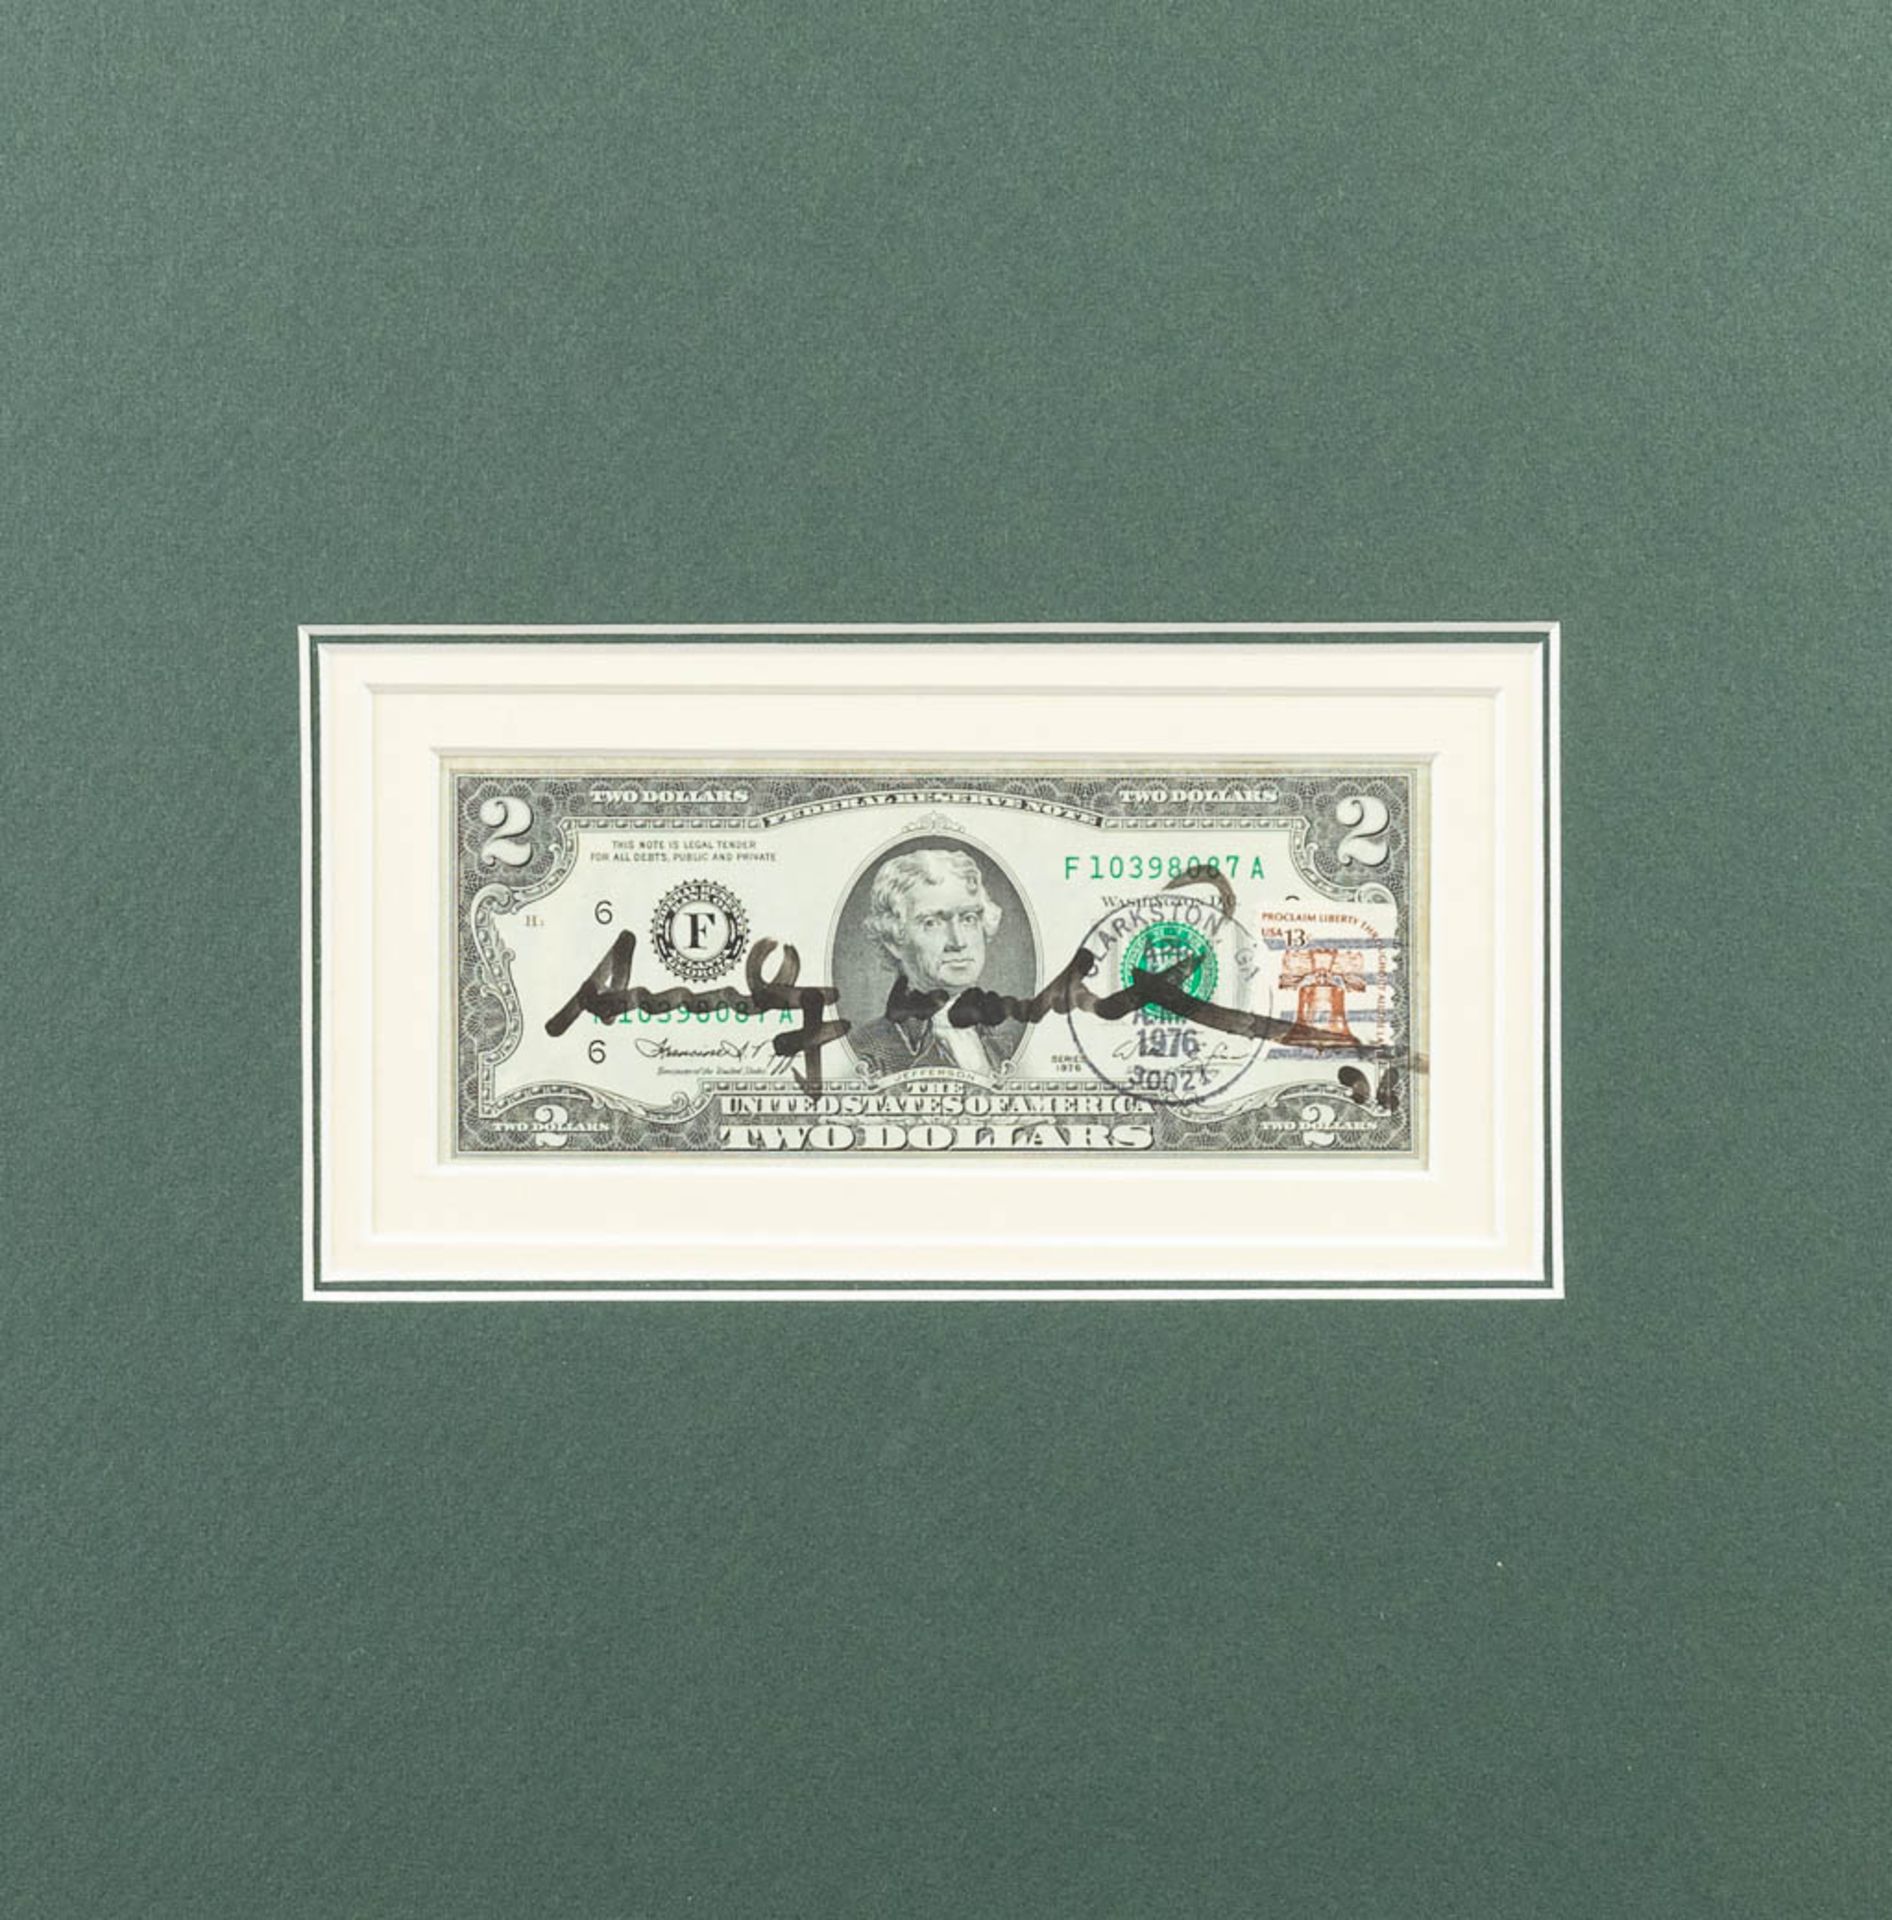 Andy WARHOL (1928-1987) 'Two dollars' (c.1976). (W: 15 x H: 6 cm) - Image 5 of 5